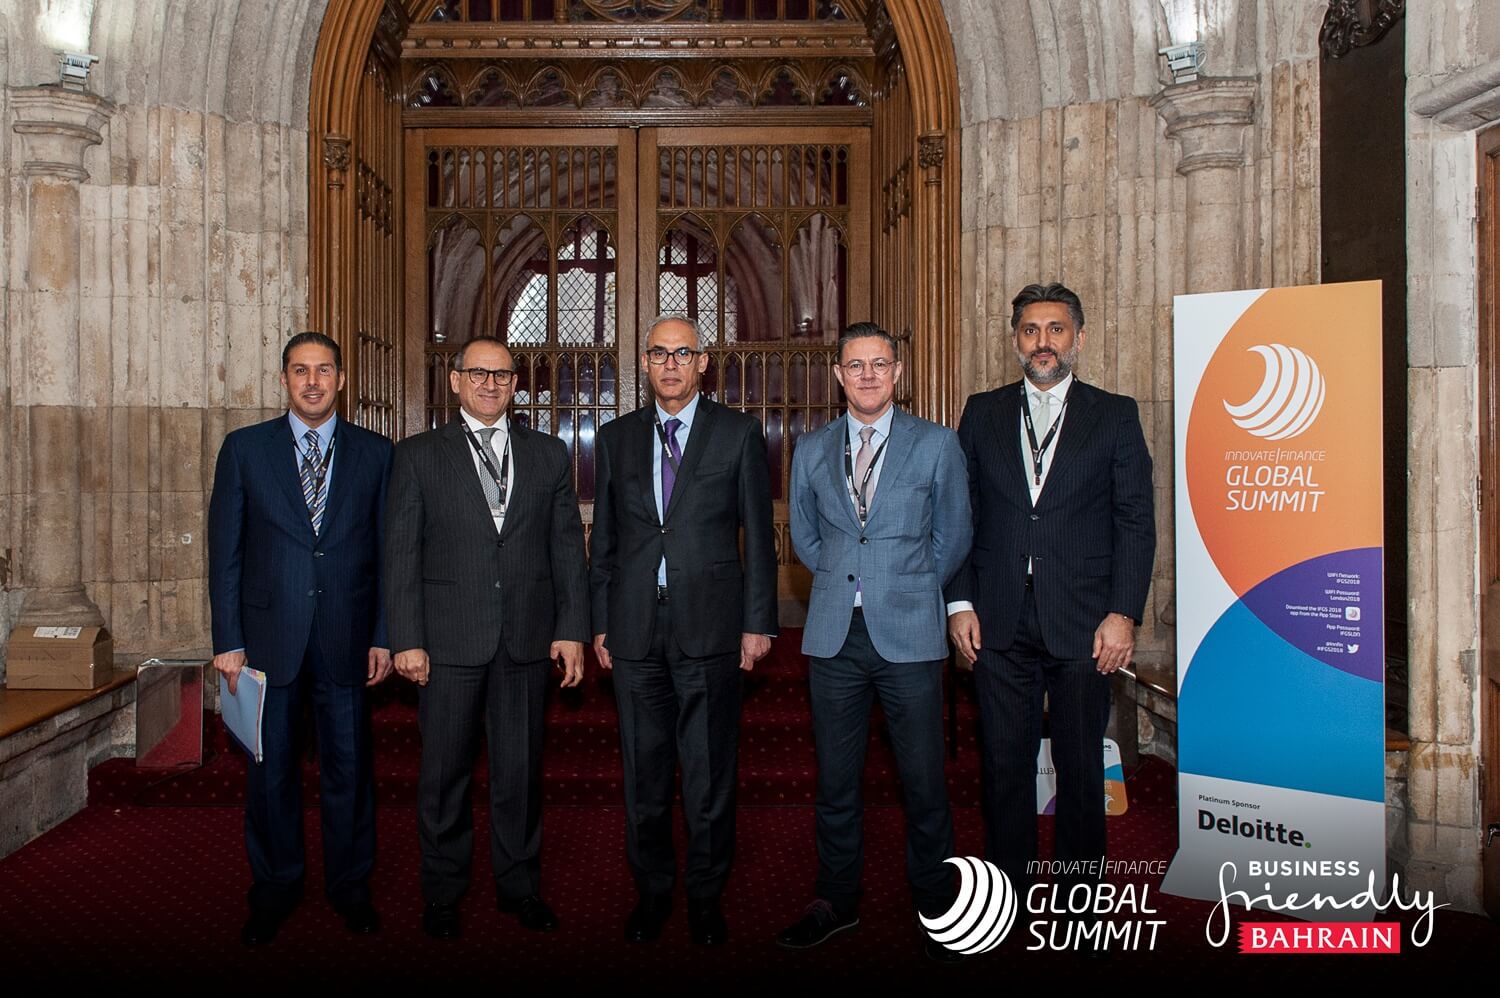 Bahrain Participates in Innovate Finance Global Summit 2018